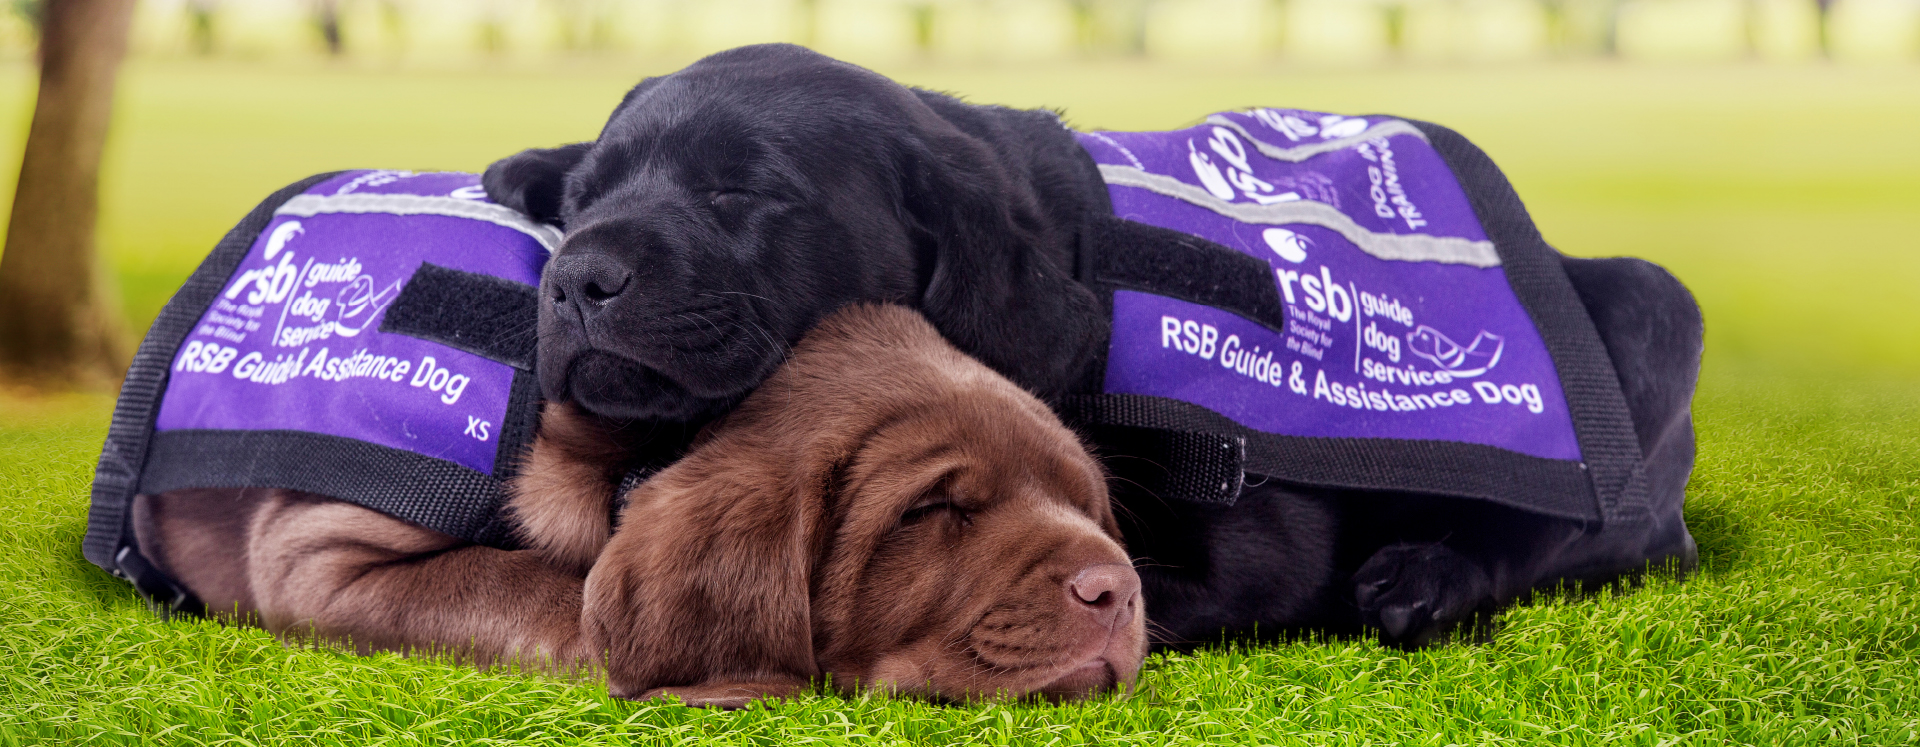 Brown puppy and a black puppy wearing purple rsb vests.